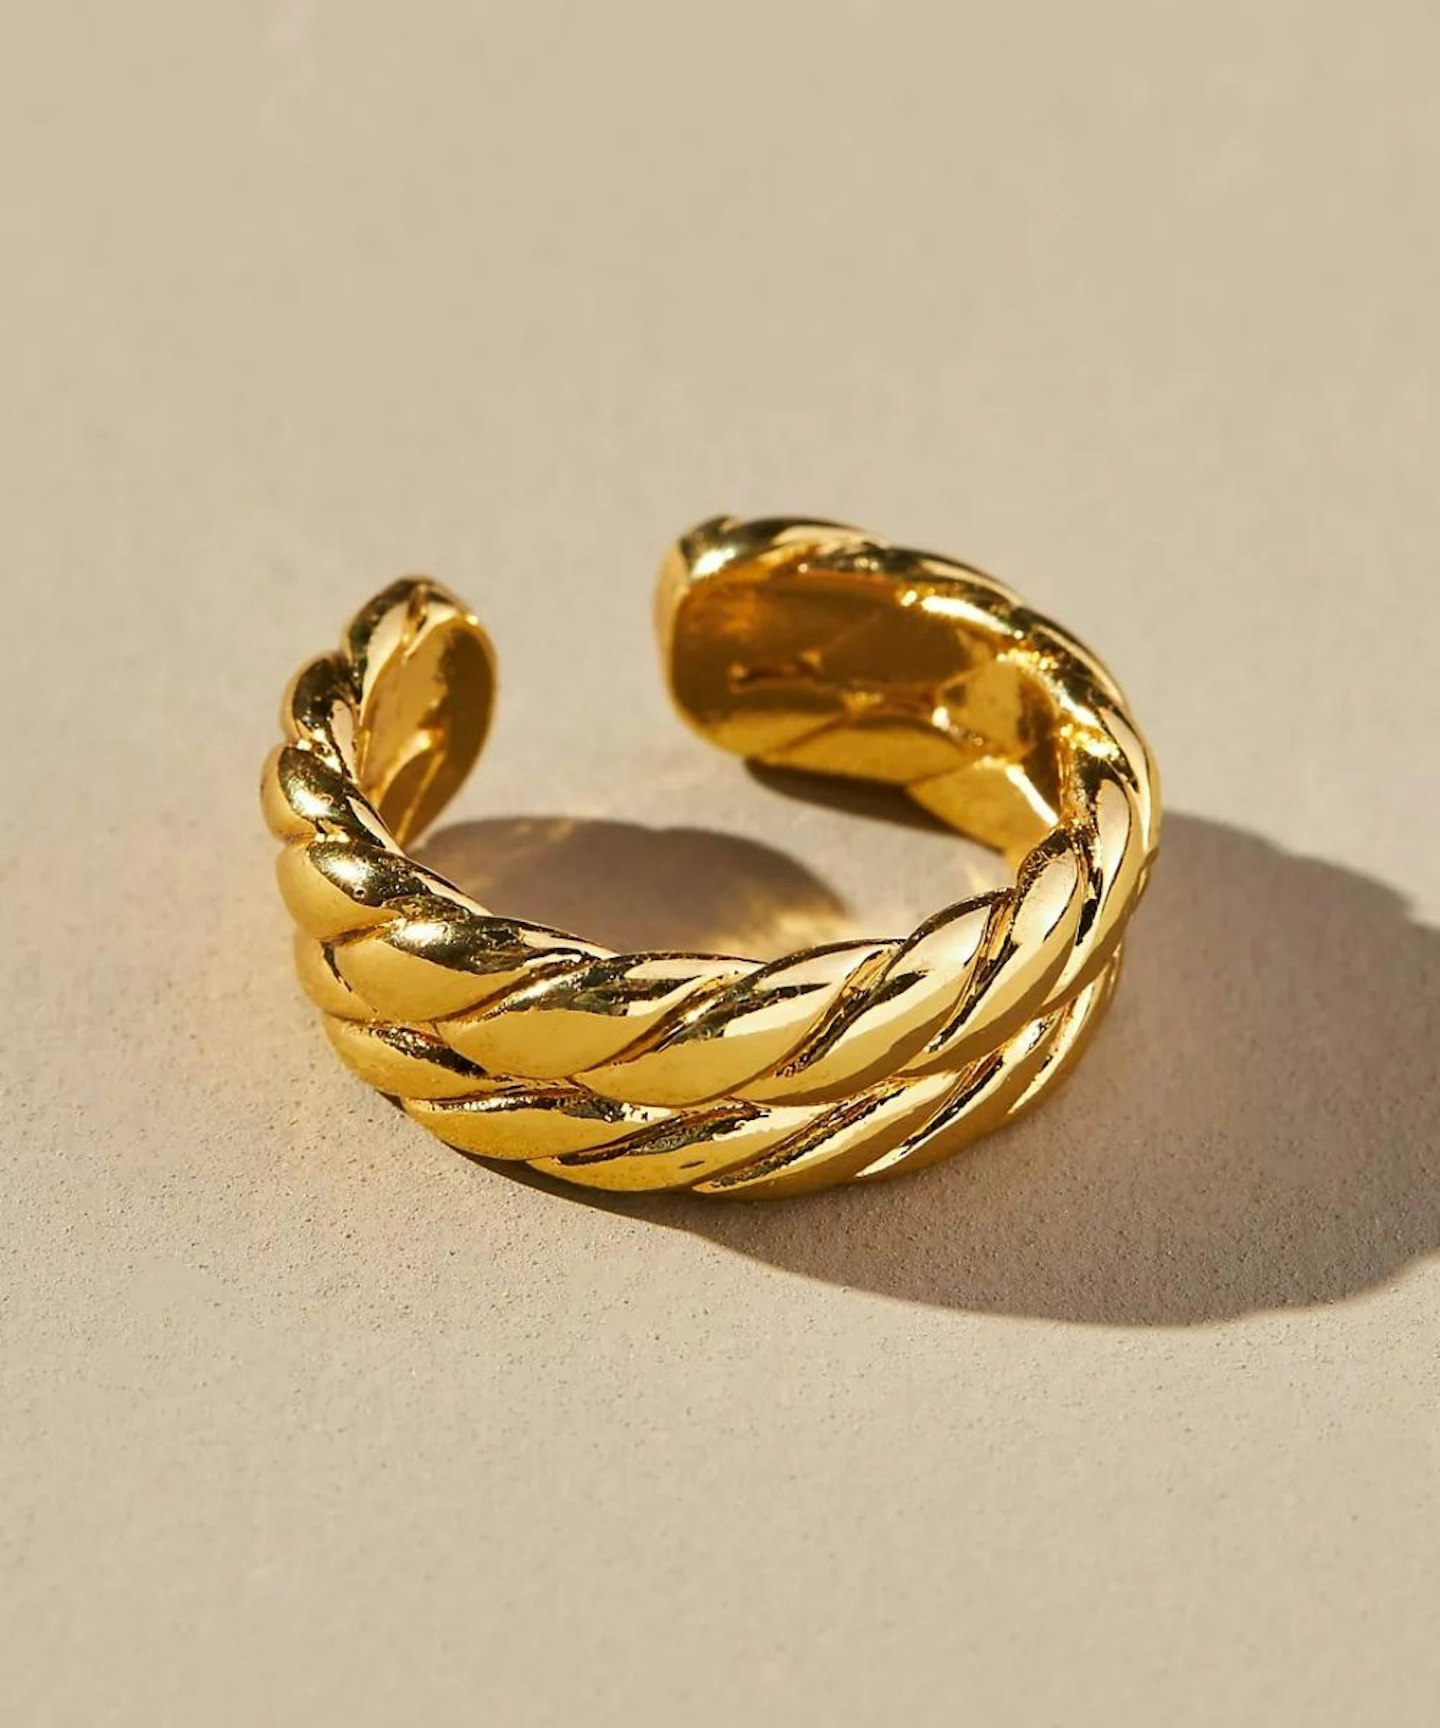 Double-Braid Ring